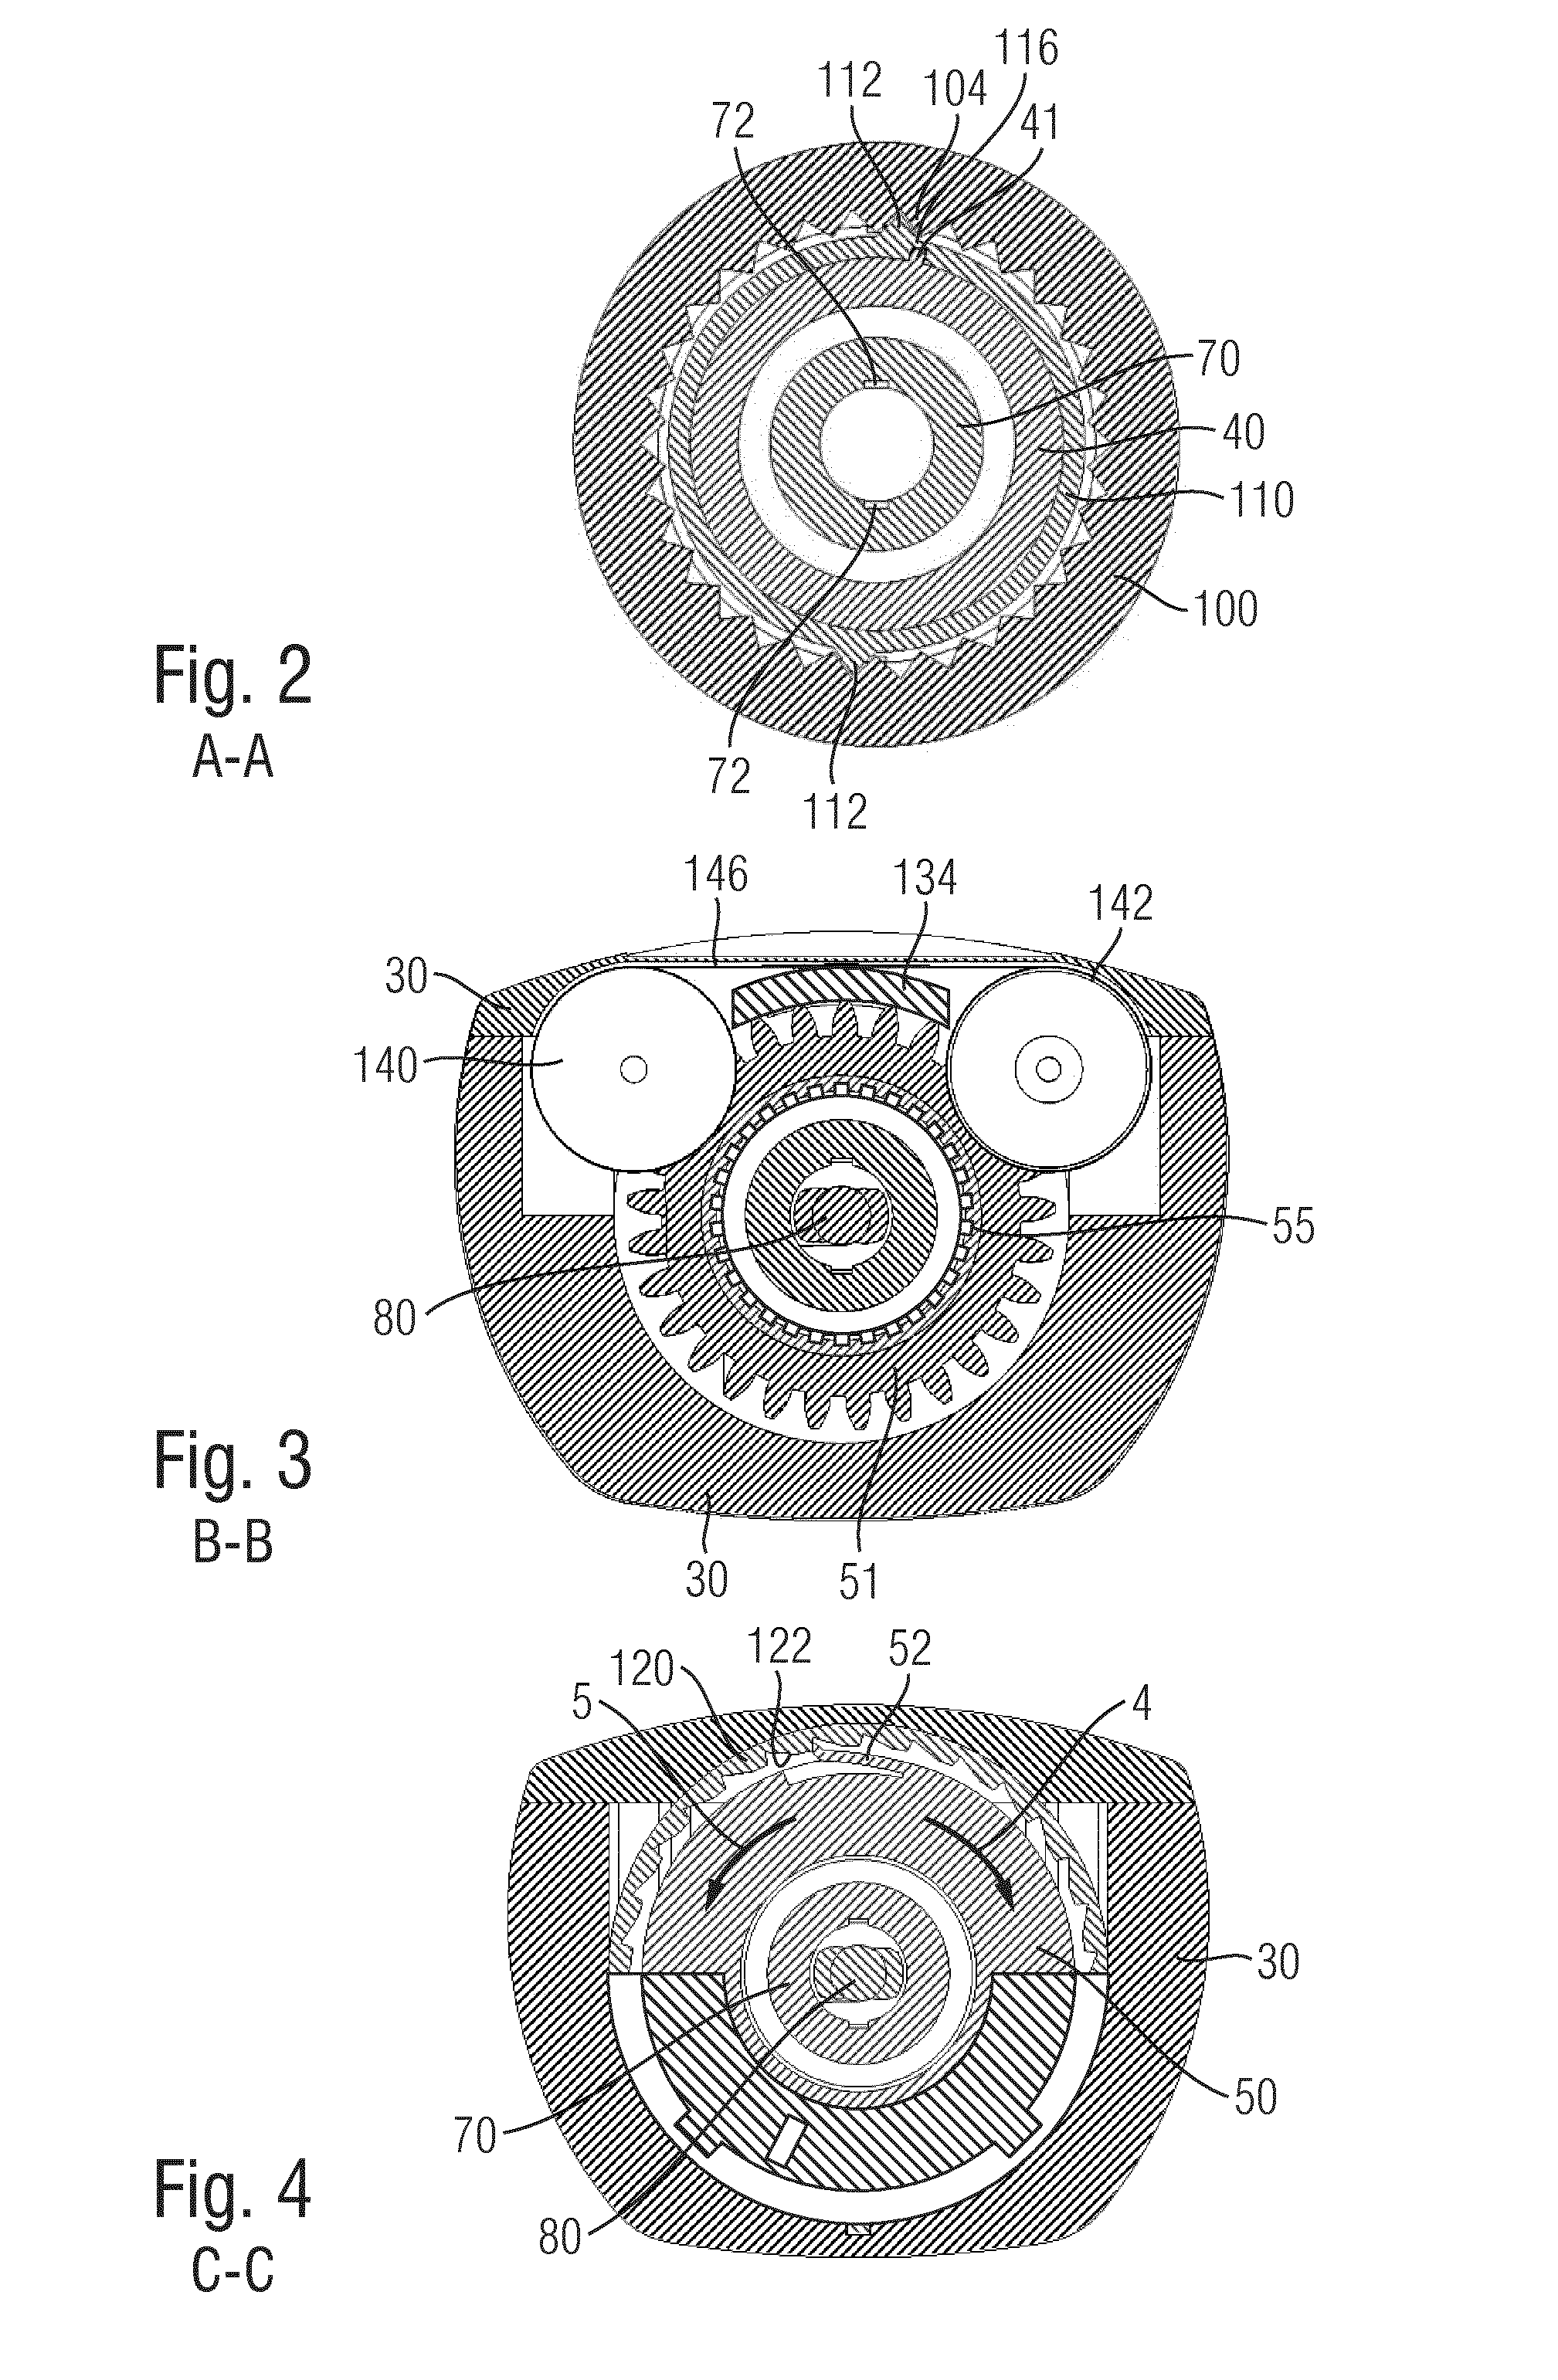 Drive mechanism of a drug delivery device